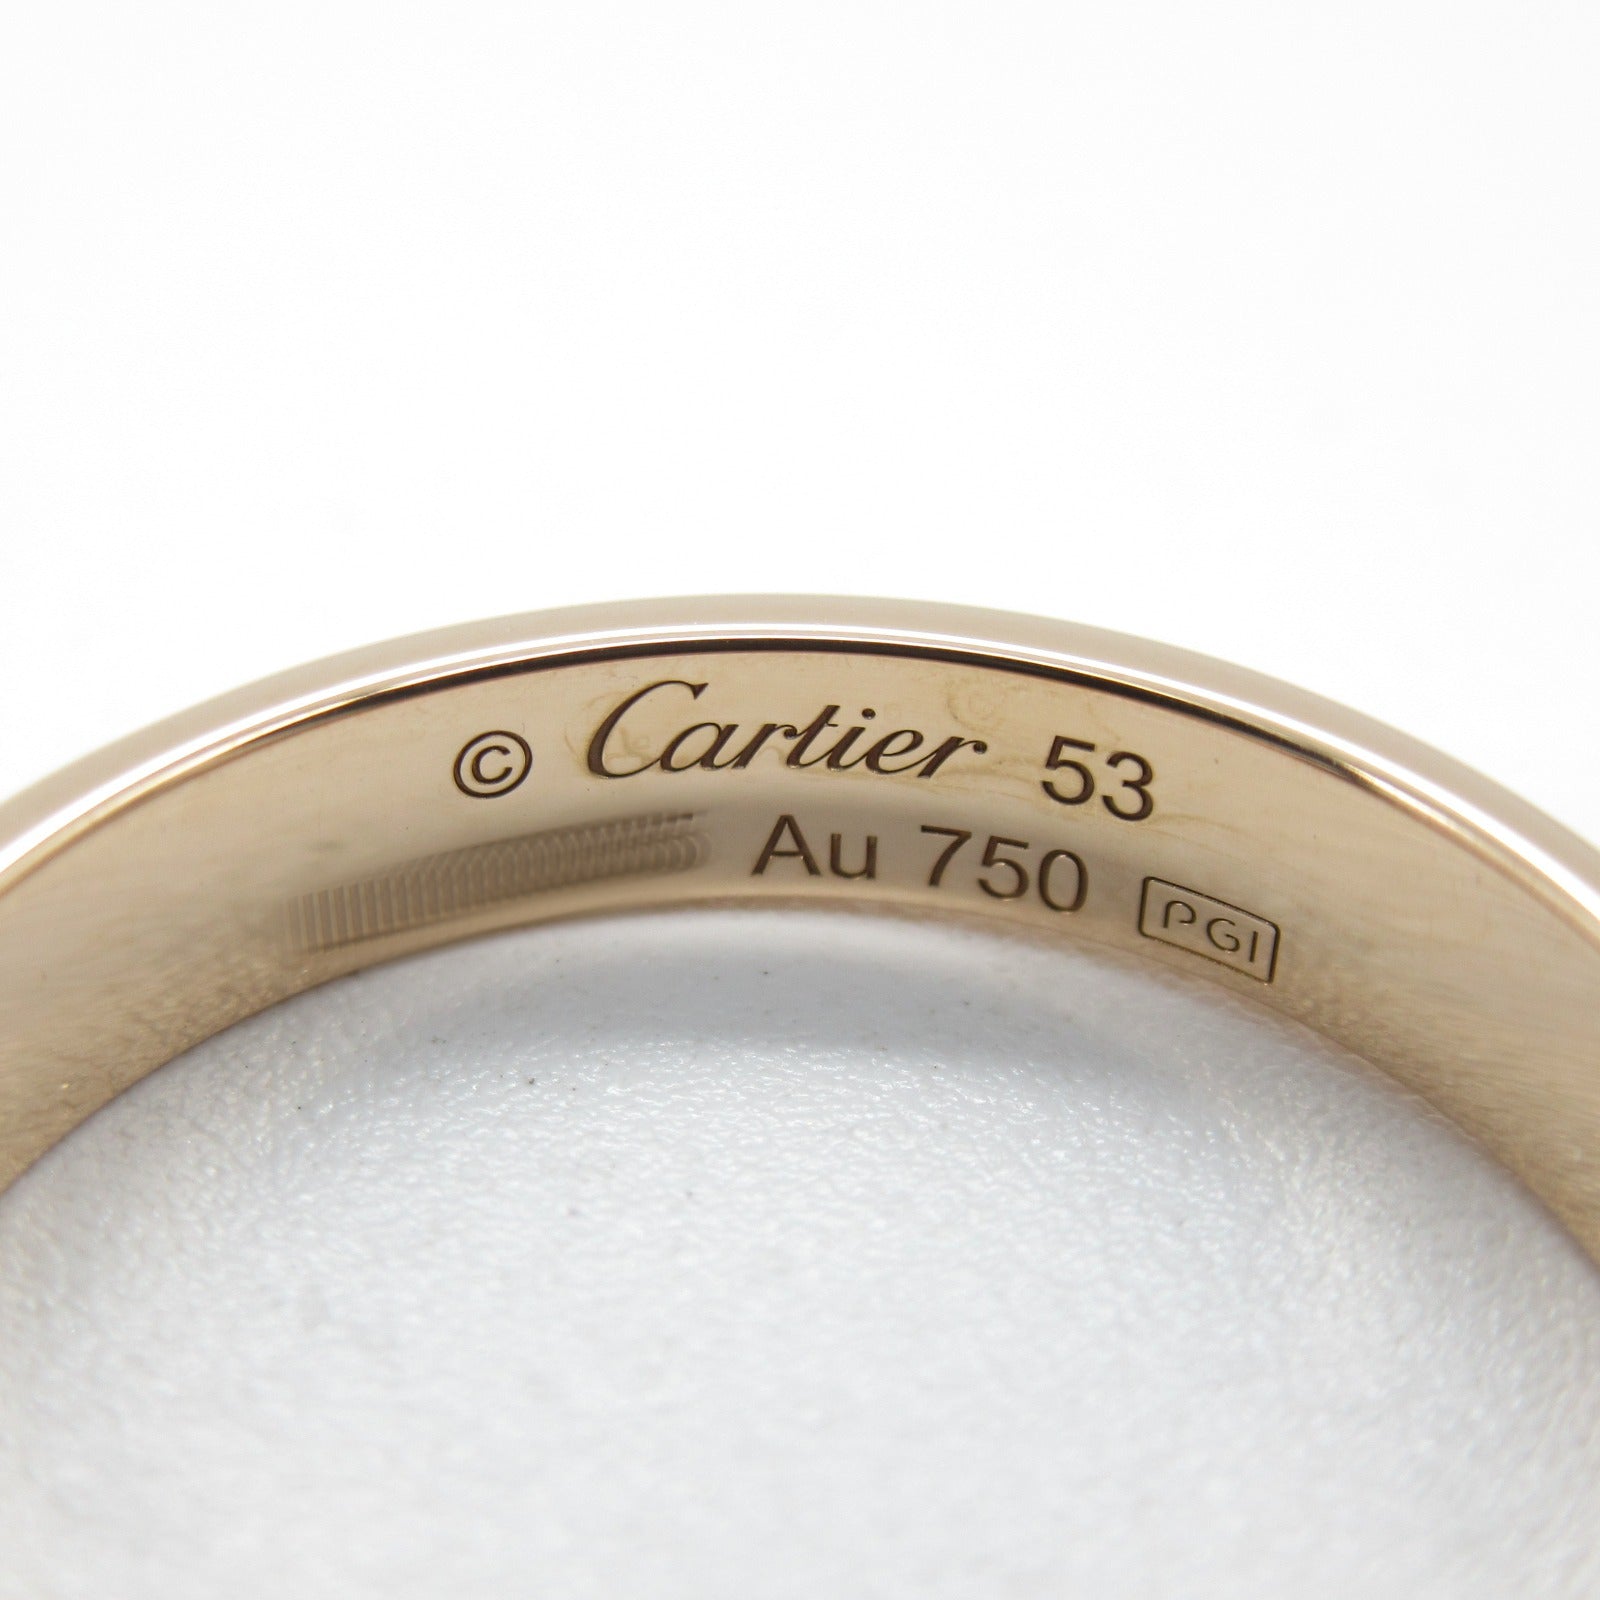 Cartier Cartier Mini- Ring Ring Jewelry K18PG (Pink G)  G